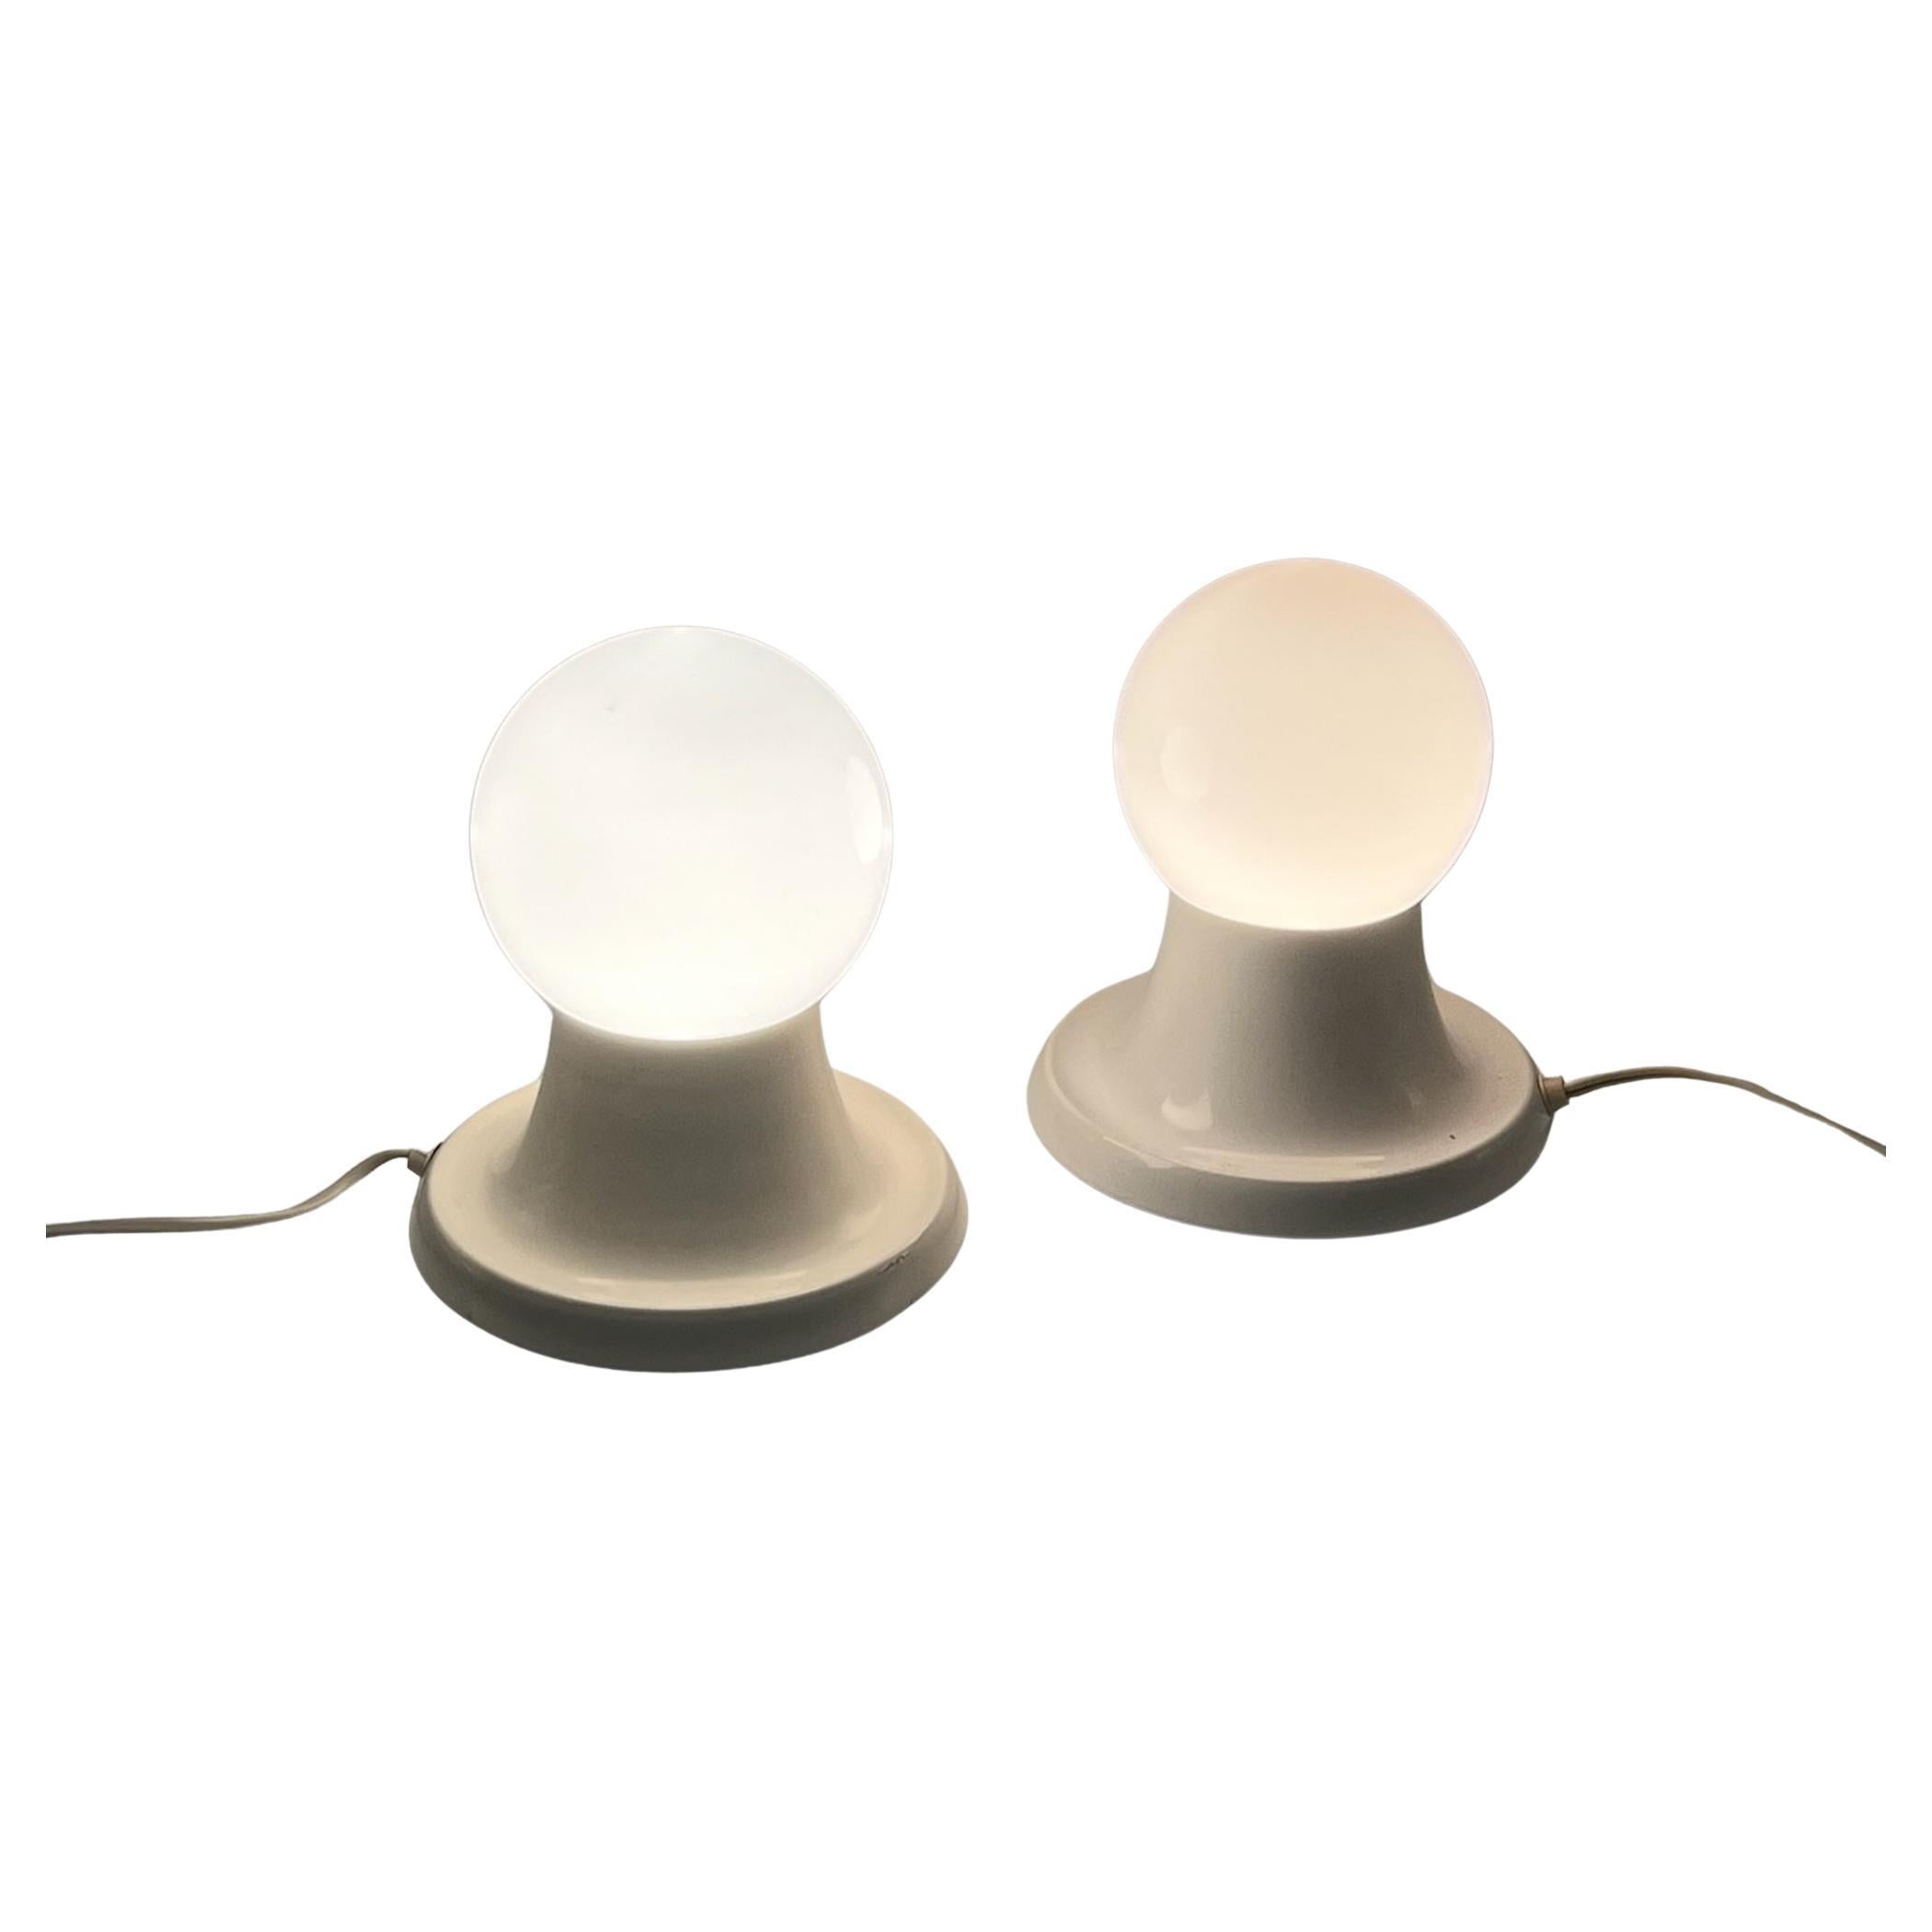 Iconic pair of FLOS 'Light Ball' table lamps Castiglioni Design, 1960s For Sale 3